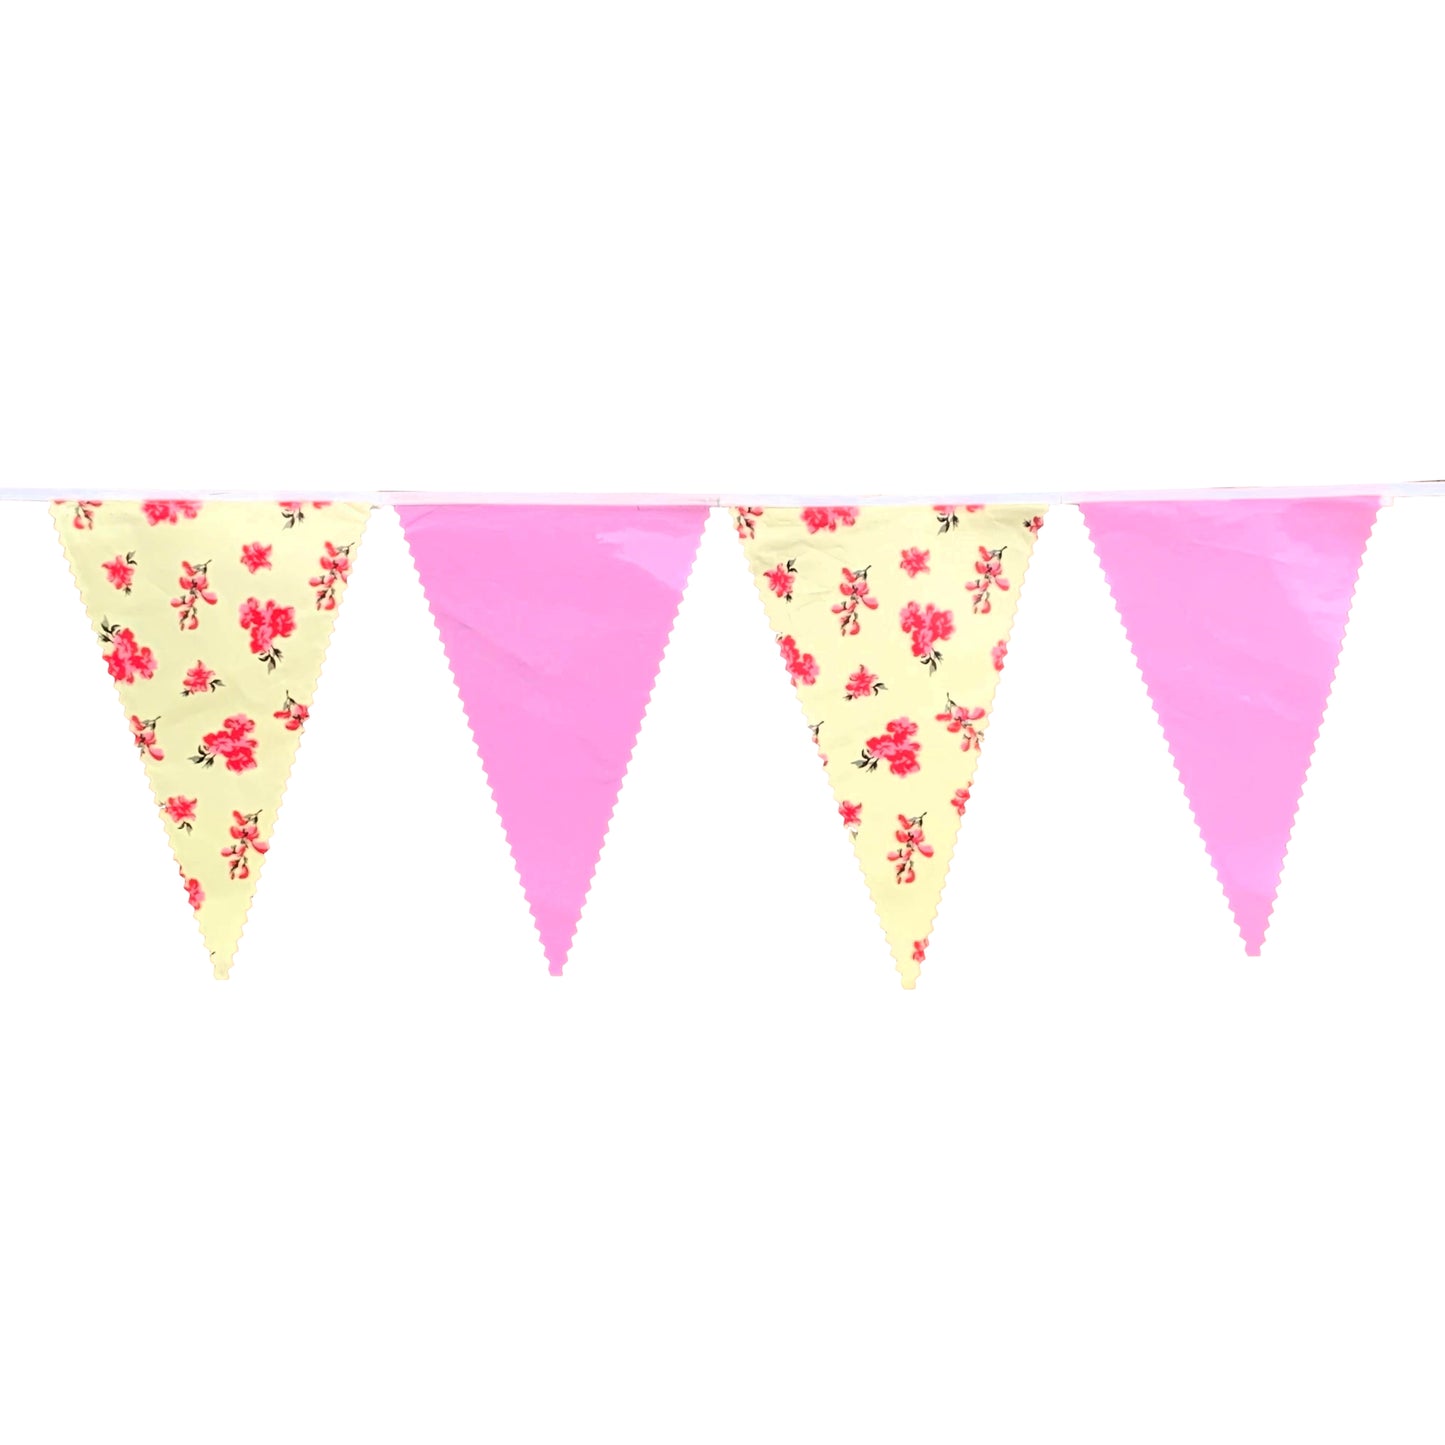 Pink & Yellow Vintage Print Bunting 10m with 20 Pennants